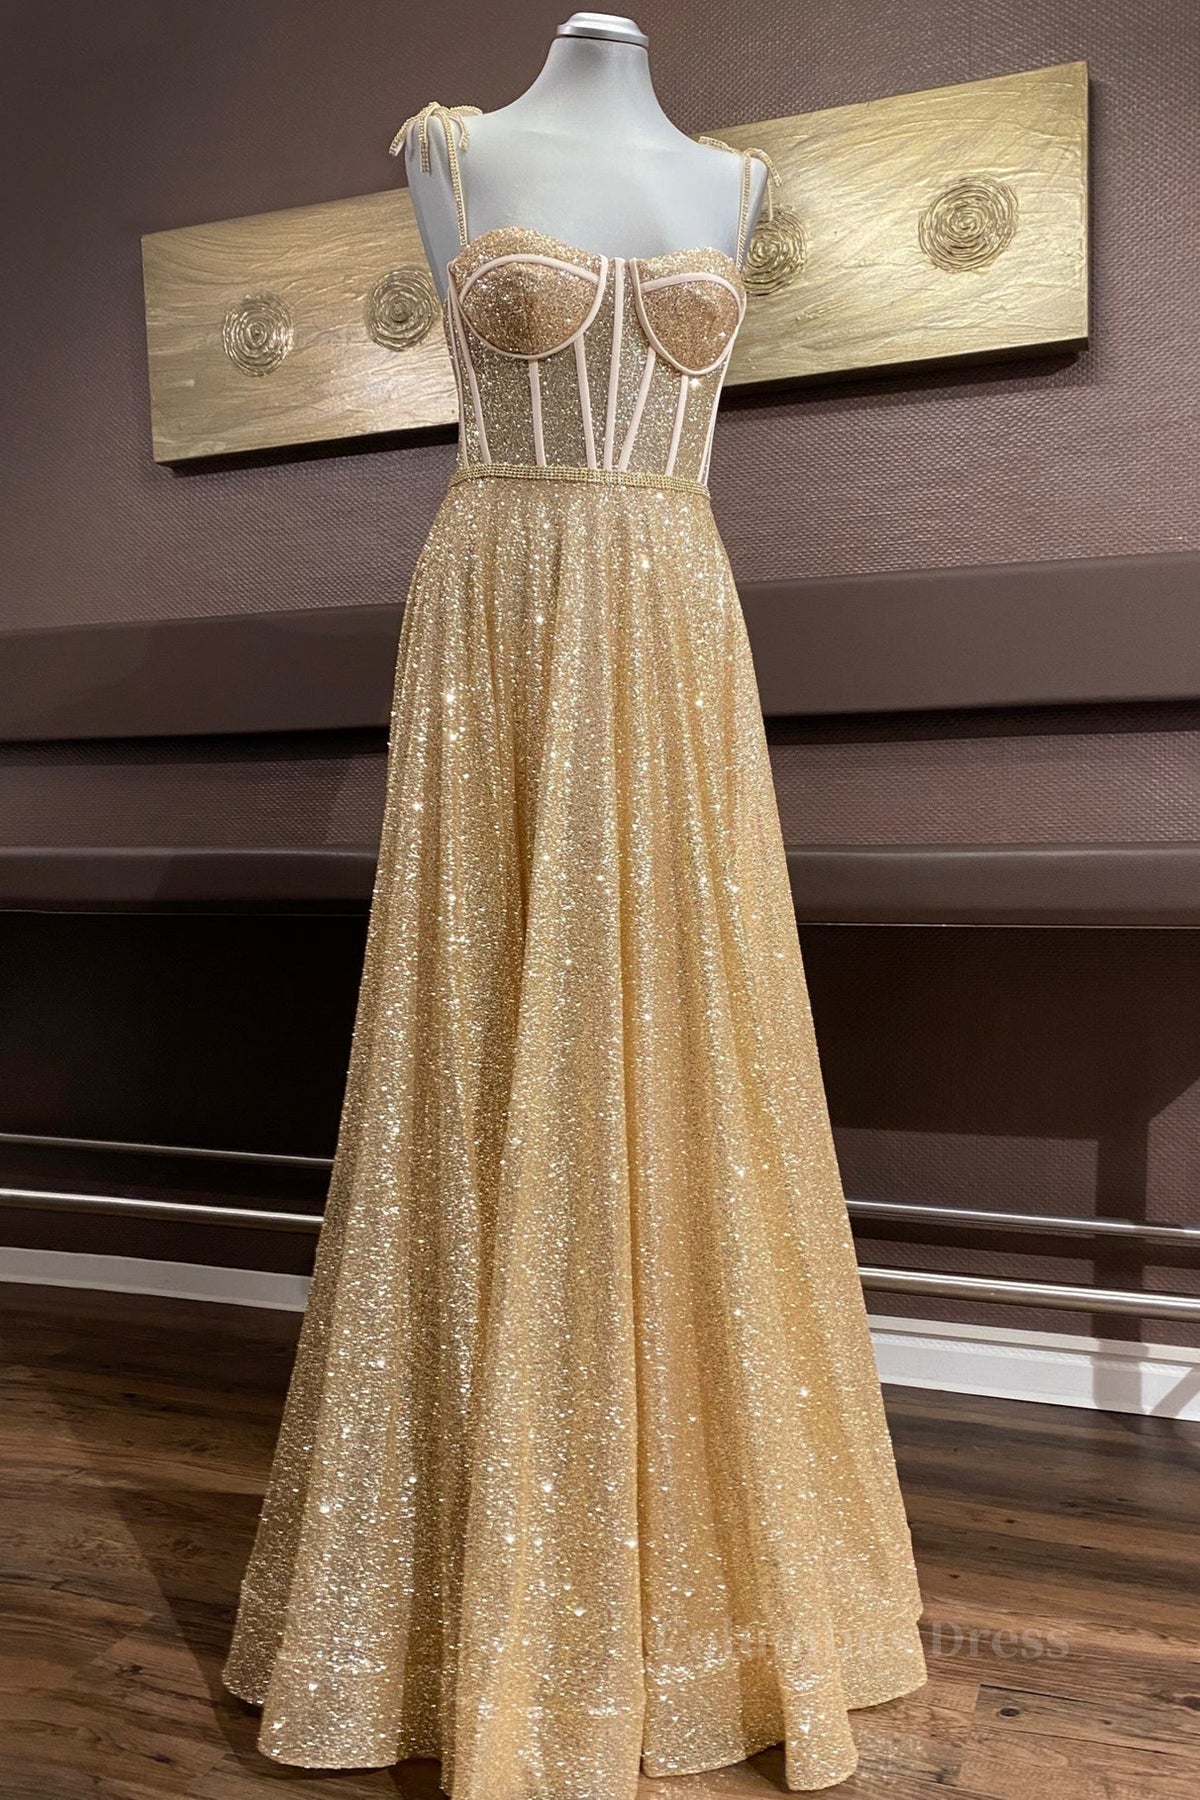 Shiny A Line Spaghetti Straps Gold Corset Prom Dresses Long, Sweetheart Neck Golden Corset Formal Dresses, Gold Tulle Evening Dresses WT1856 Outfits, Bridesmaid Dress With Sleeve